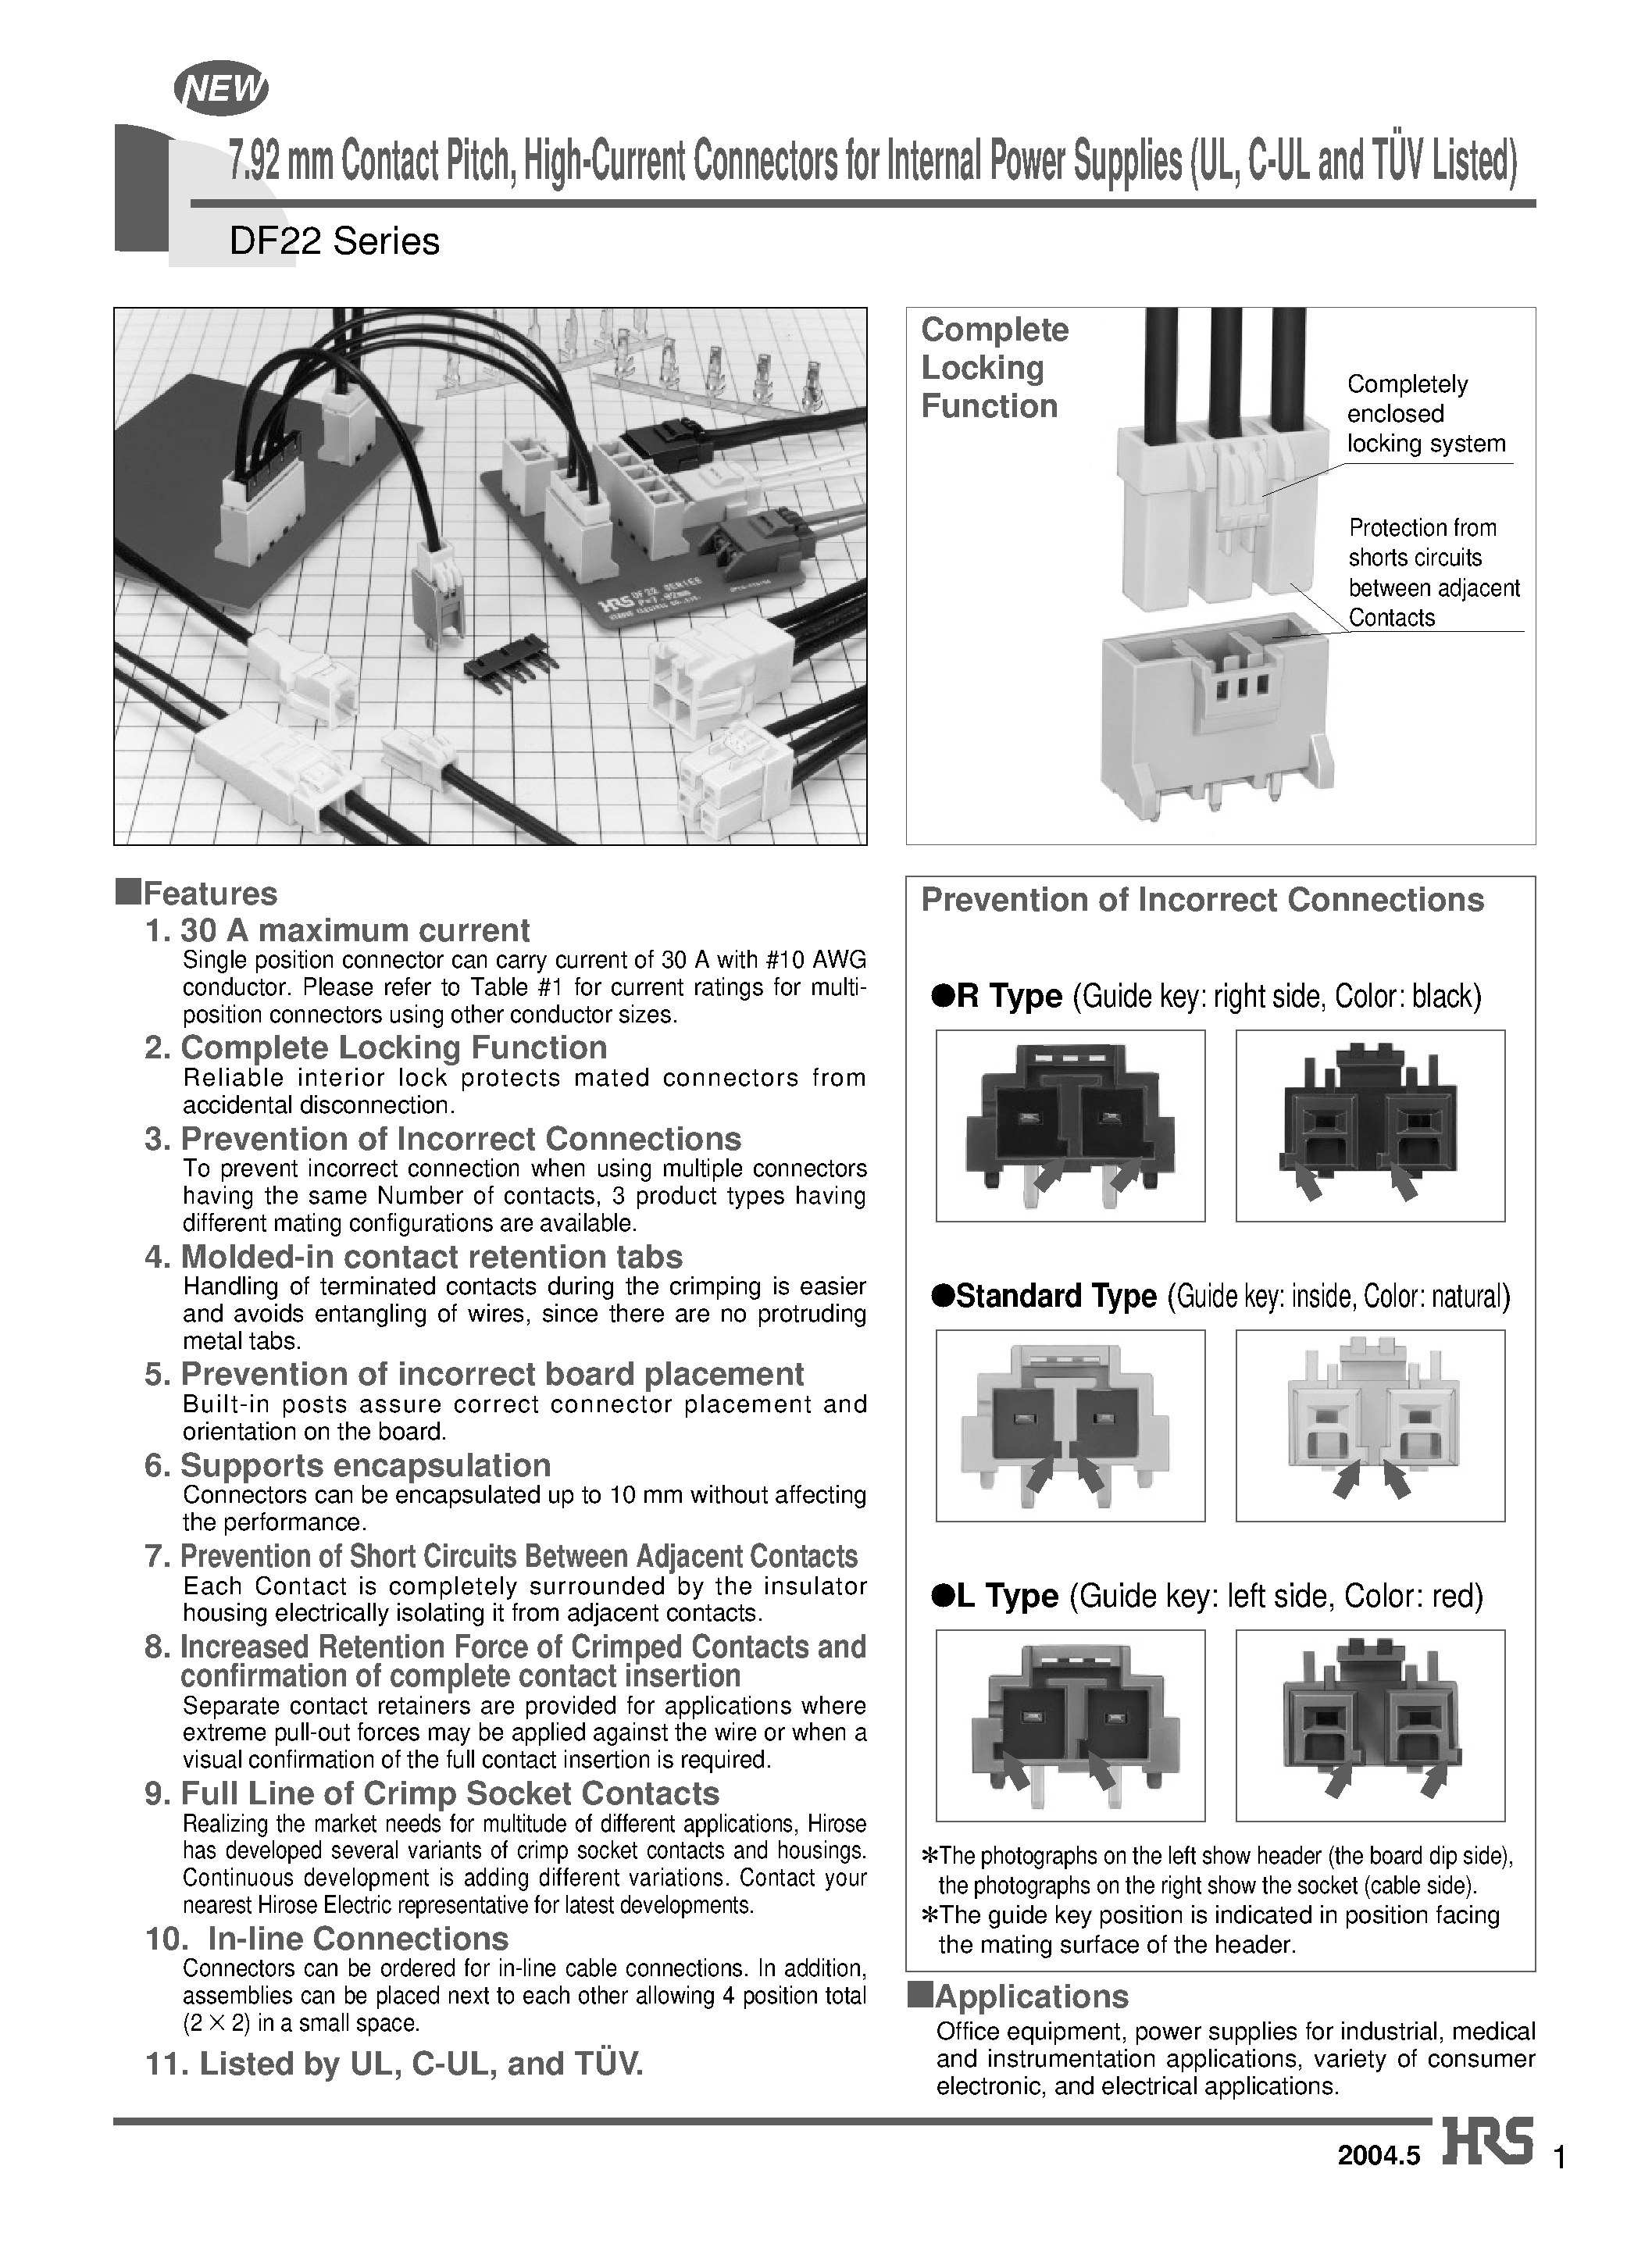 Даташит DF22AL-2DEP-7.92C - 7.92 mm Contact Pitch/ High-Current Connectors for Internal Power Supplies (UL/ C-UL and TUV Listed) страница 1